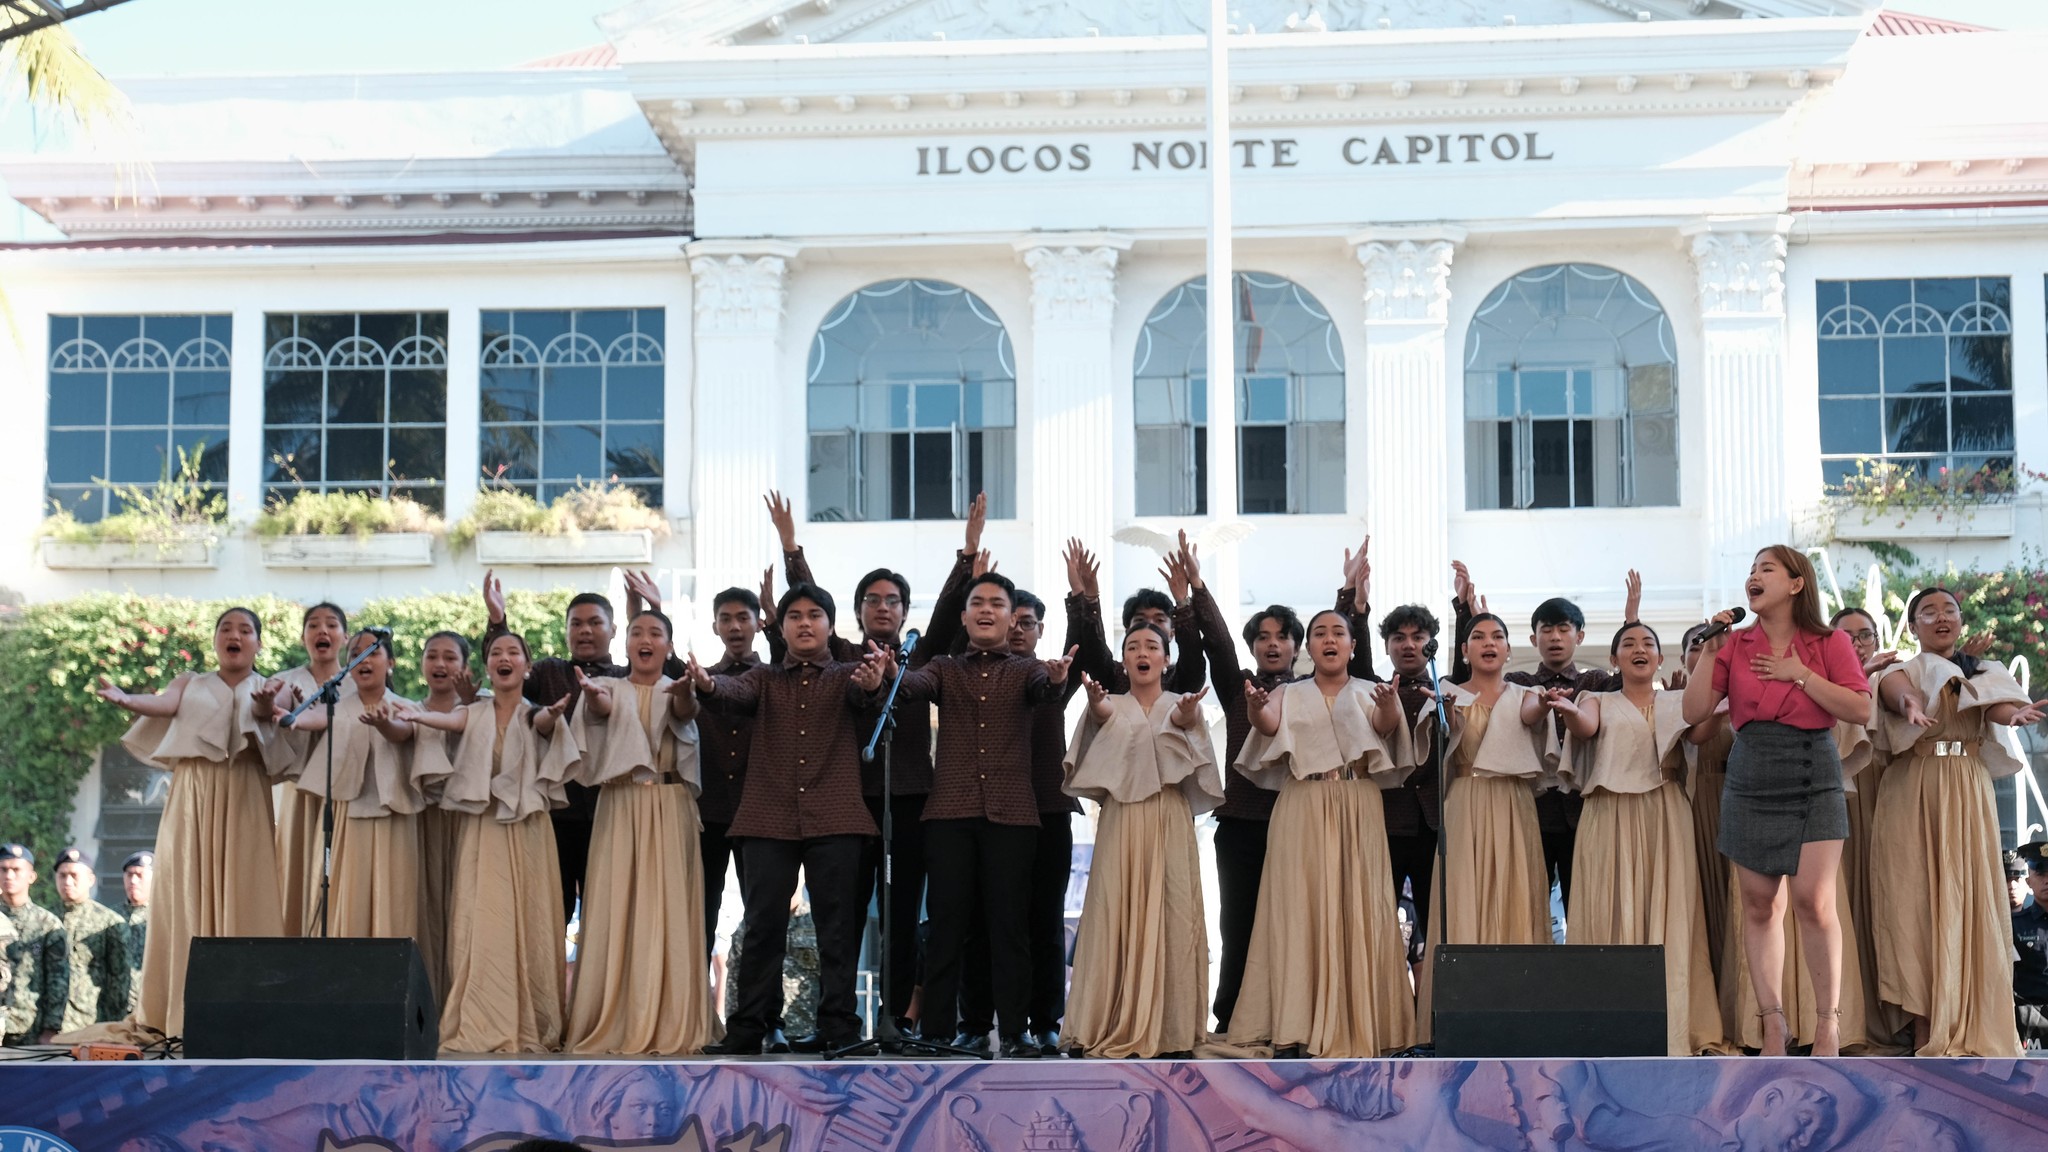 Ilocos Norte marks its 205th founding anniversary on Thursday (Feb. 2) with ceremonies at the provincial capitol grounds